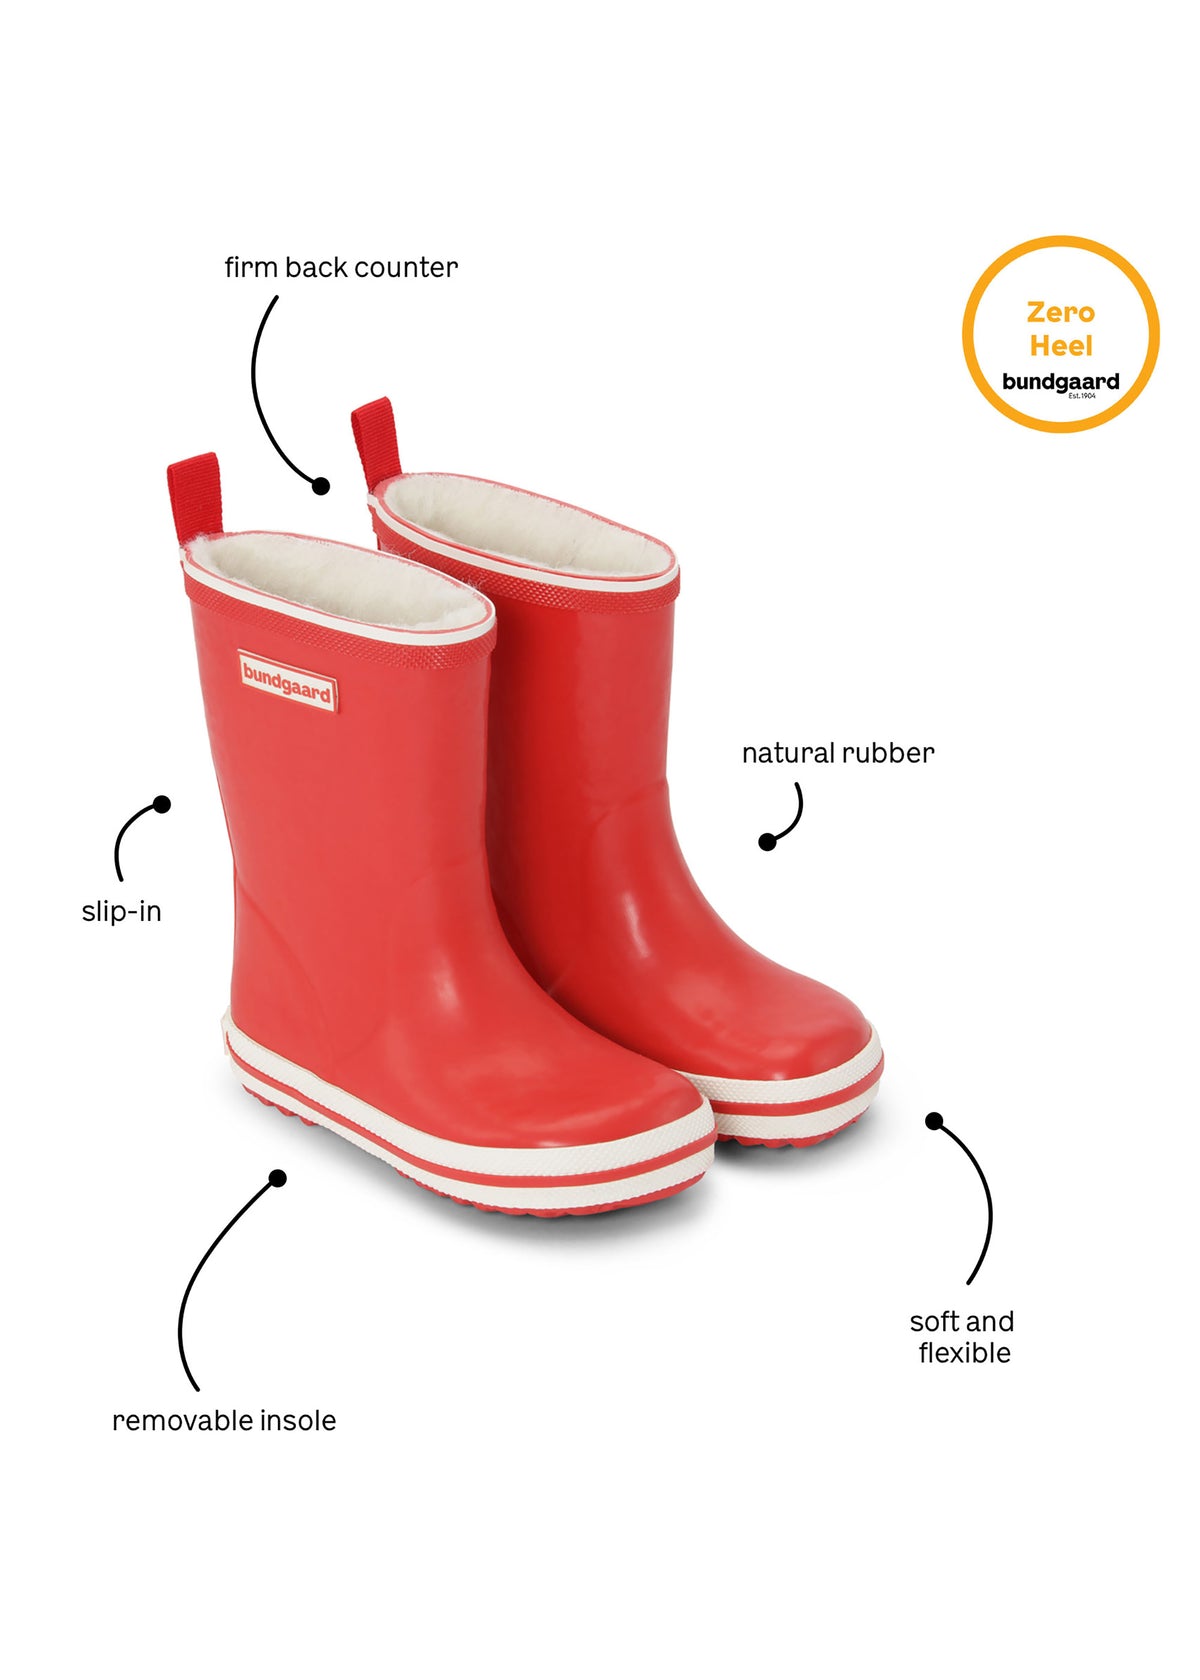 Rubber boots with a warm lining - pink terrain pattern, Charly High Warm